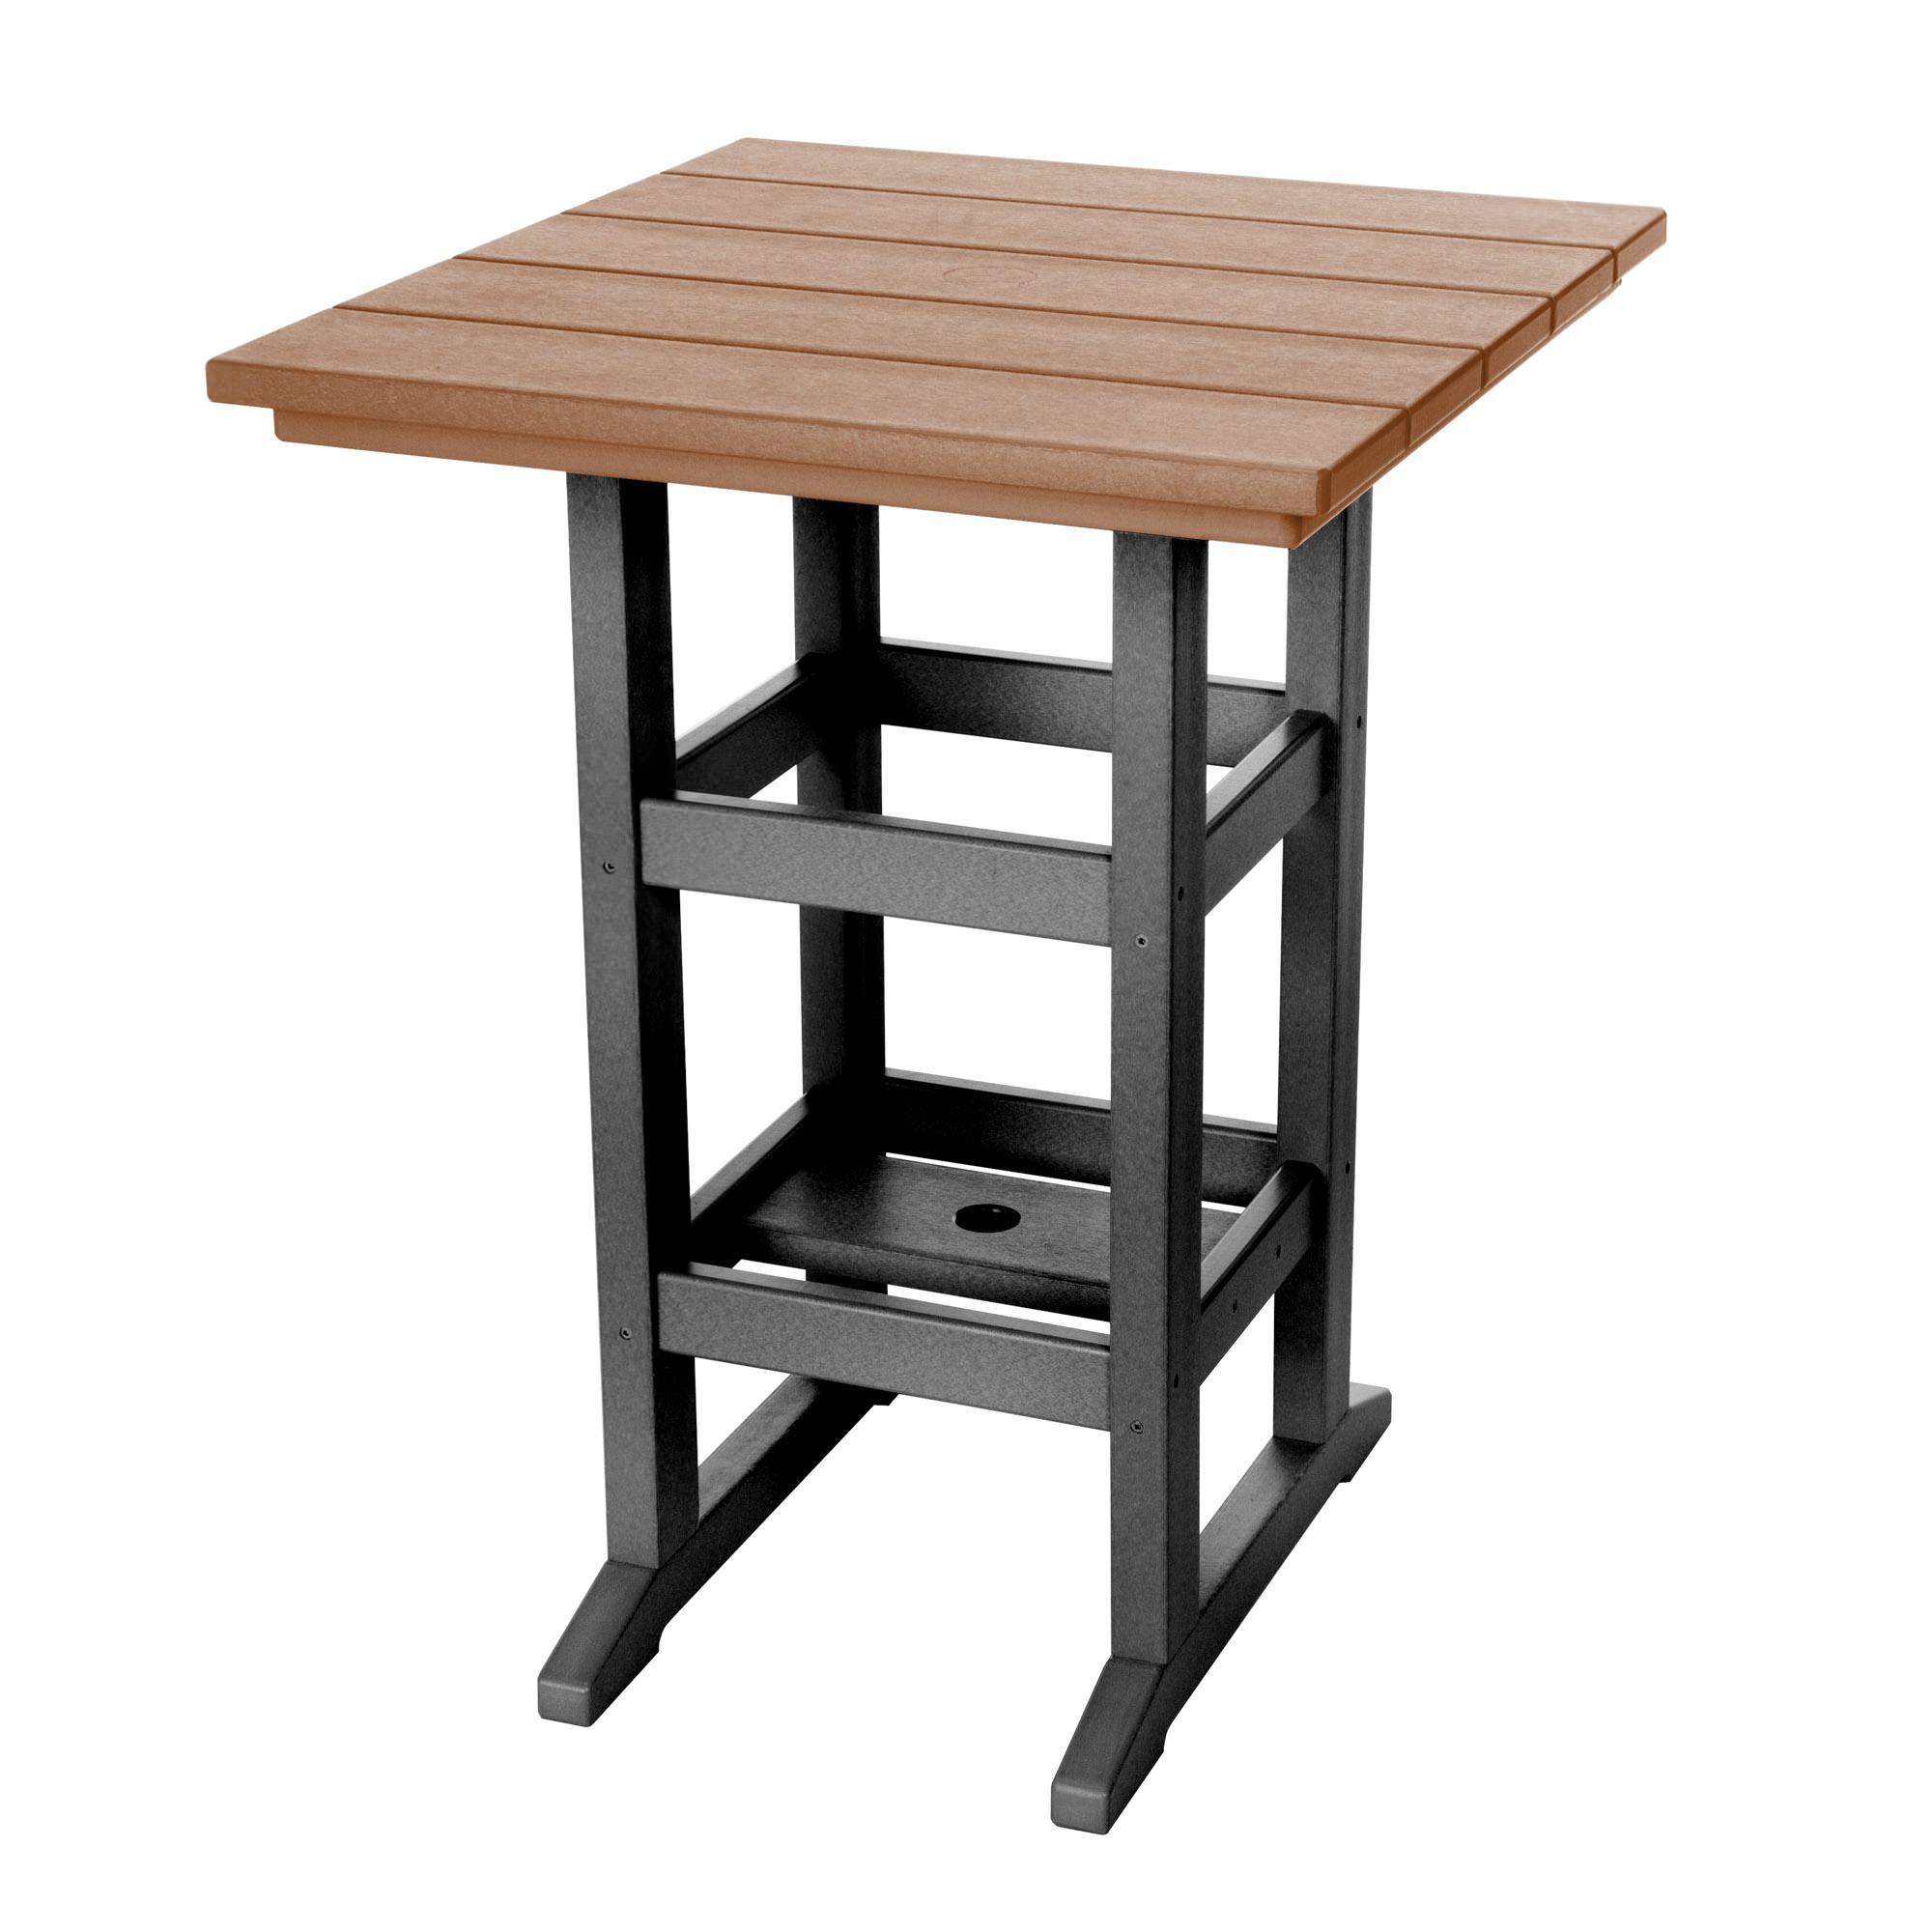 Durawood Classic Counter Height Table Nags Head Hammocks